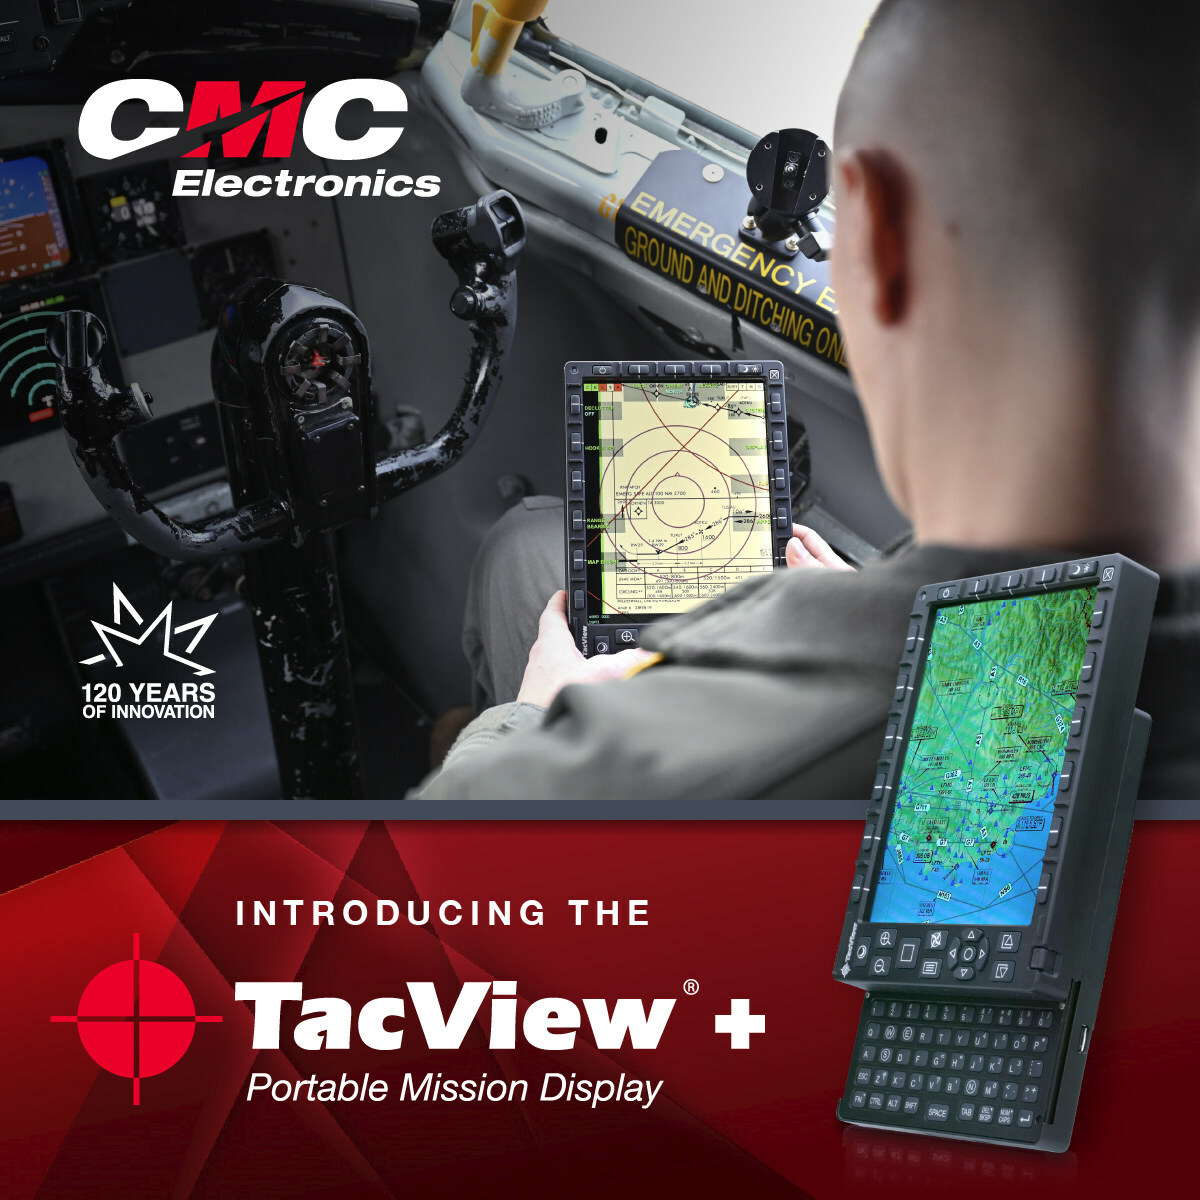 The introduction of Real-Time Information in the Cockpit (RTIC) system, with TacView Plus serving as an integral component of the system, enables aircrews to utilize airspace more effectively while ensuring crew safety by providing instant access to critical information such as precise location, threats, and receiver positions (CNW Group/CMC Electronics)